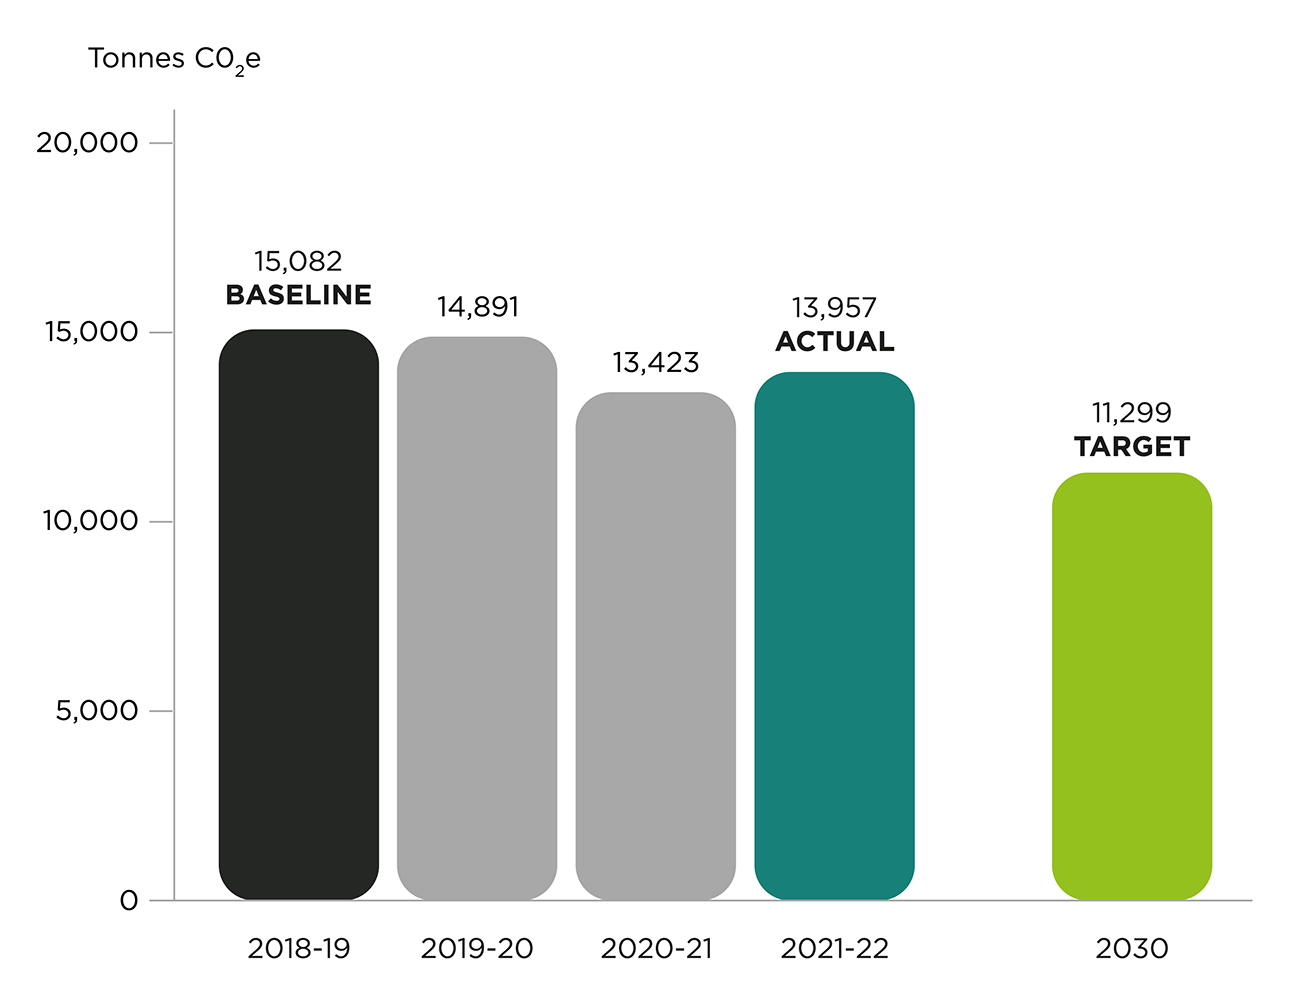 overall emissions pattern for the university towards a net zero goal of 11,299 tonnes in 2030